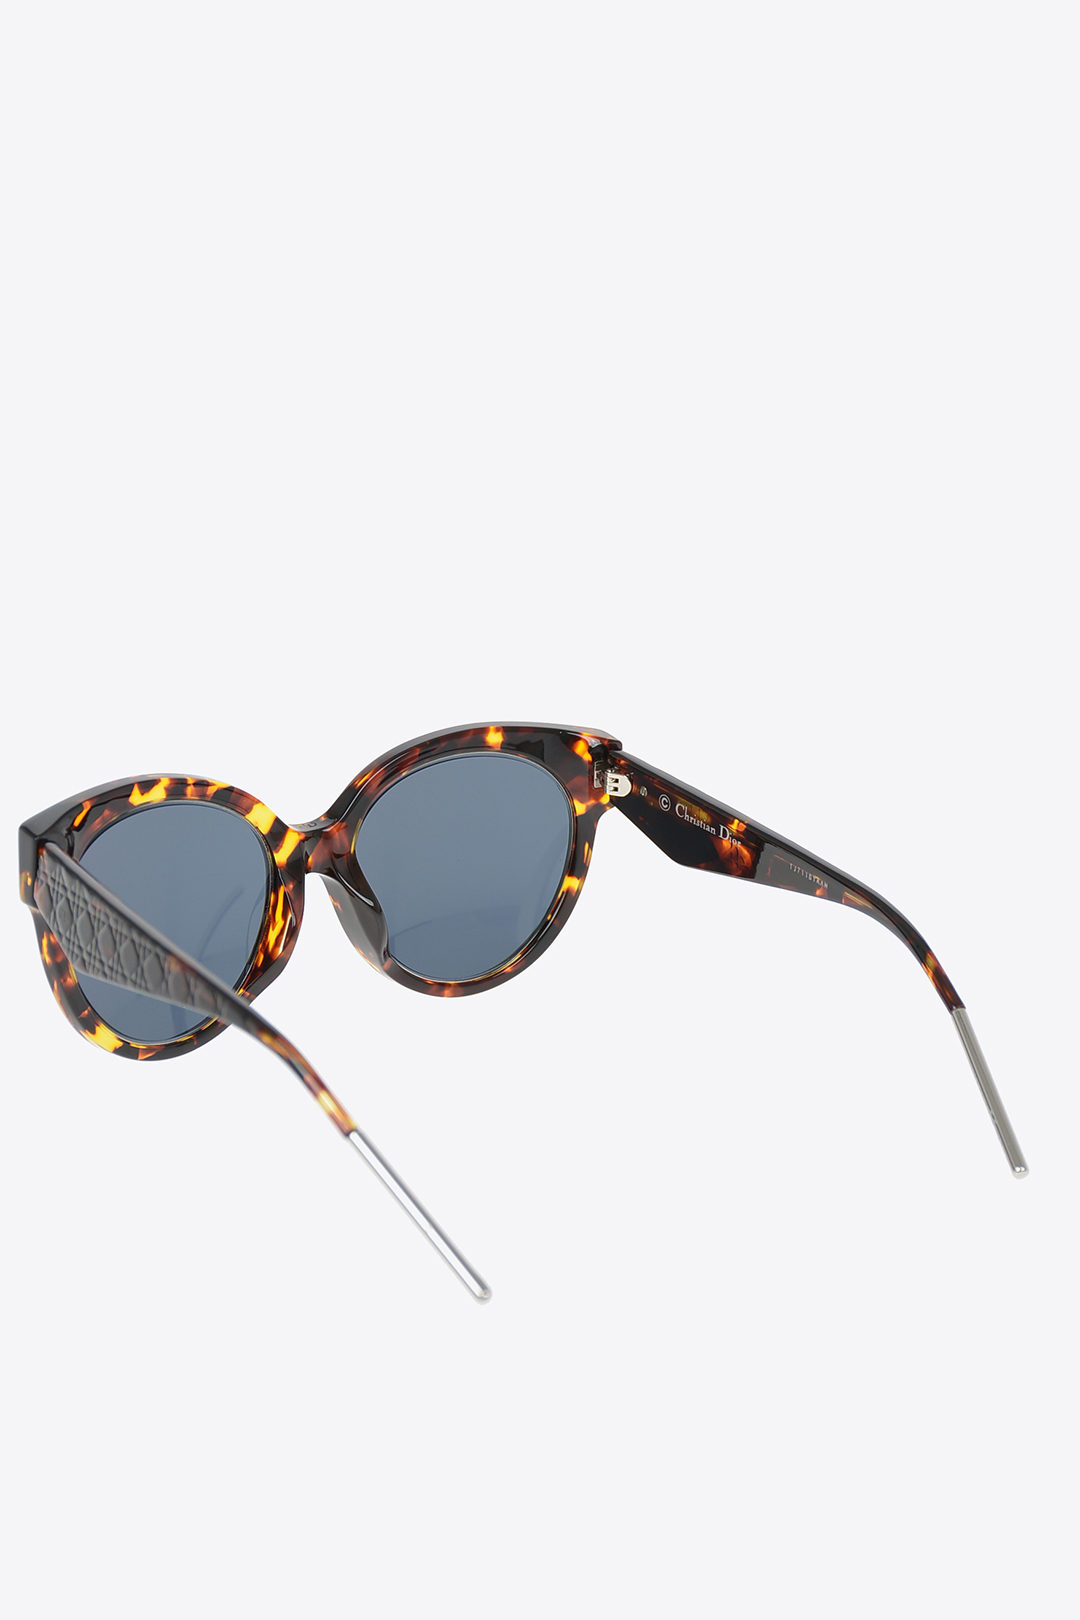 Cheap Dior Sunglasses Outlet Sale Christian Dior Outlet Store